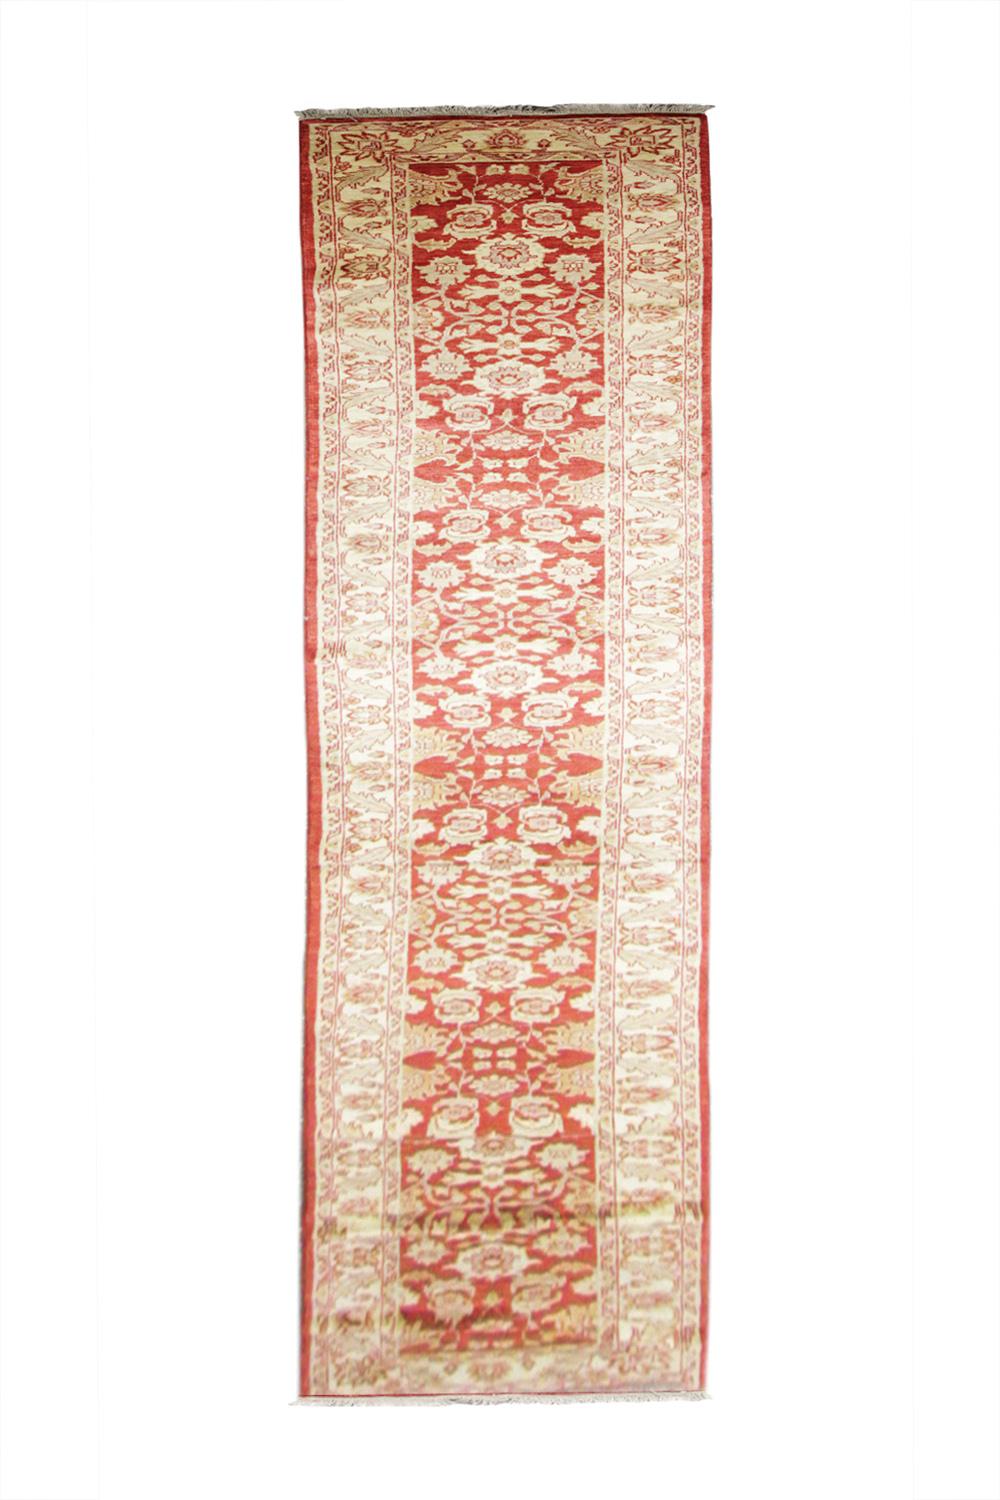 This handmade carpet is perfect for use as a living room rug. The layered border is beautifully woven with a repeat pattern throughout. The contrast between the deep red and beige hues works perfectly to create this eye-catching one of a kind